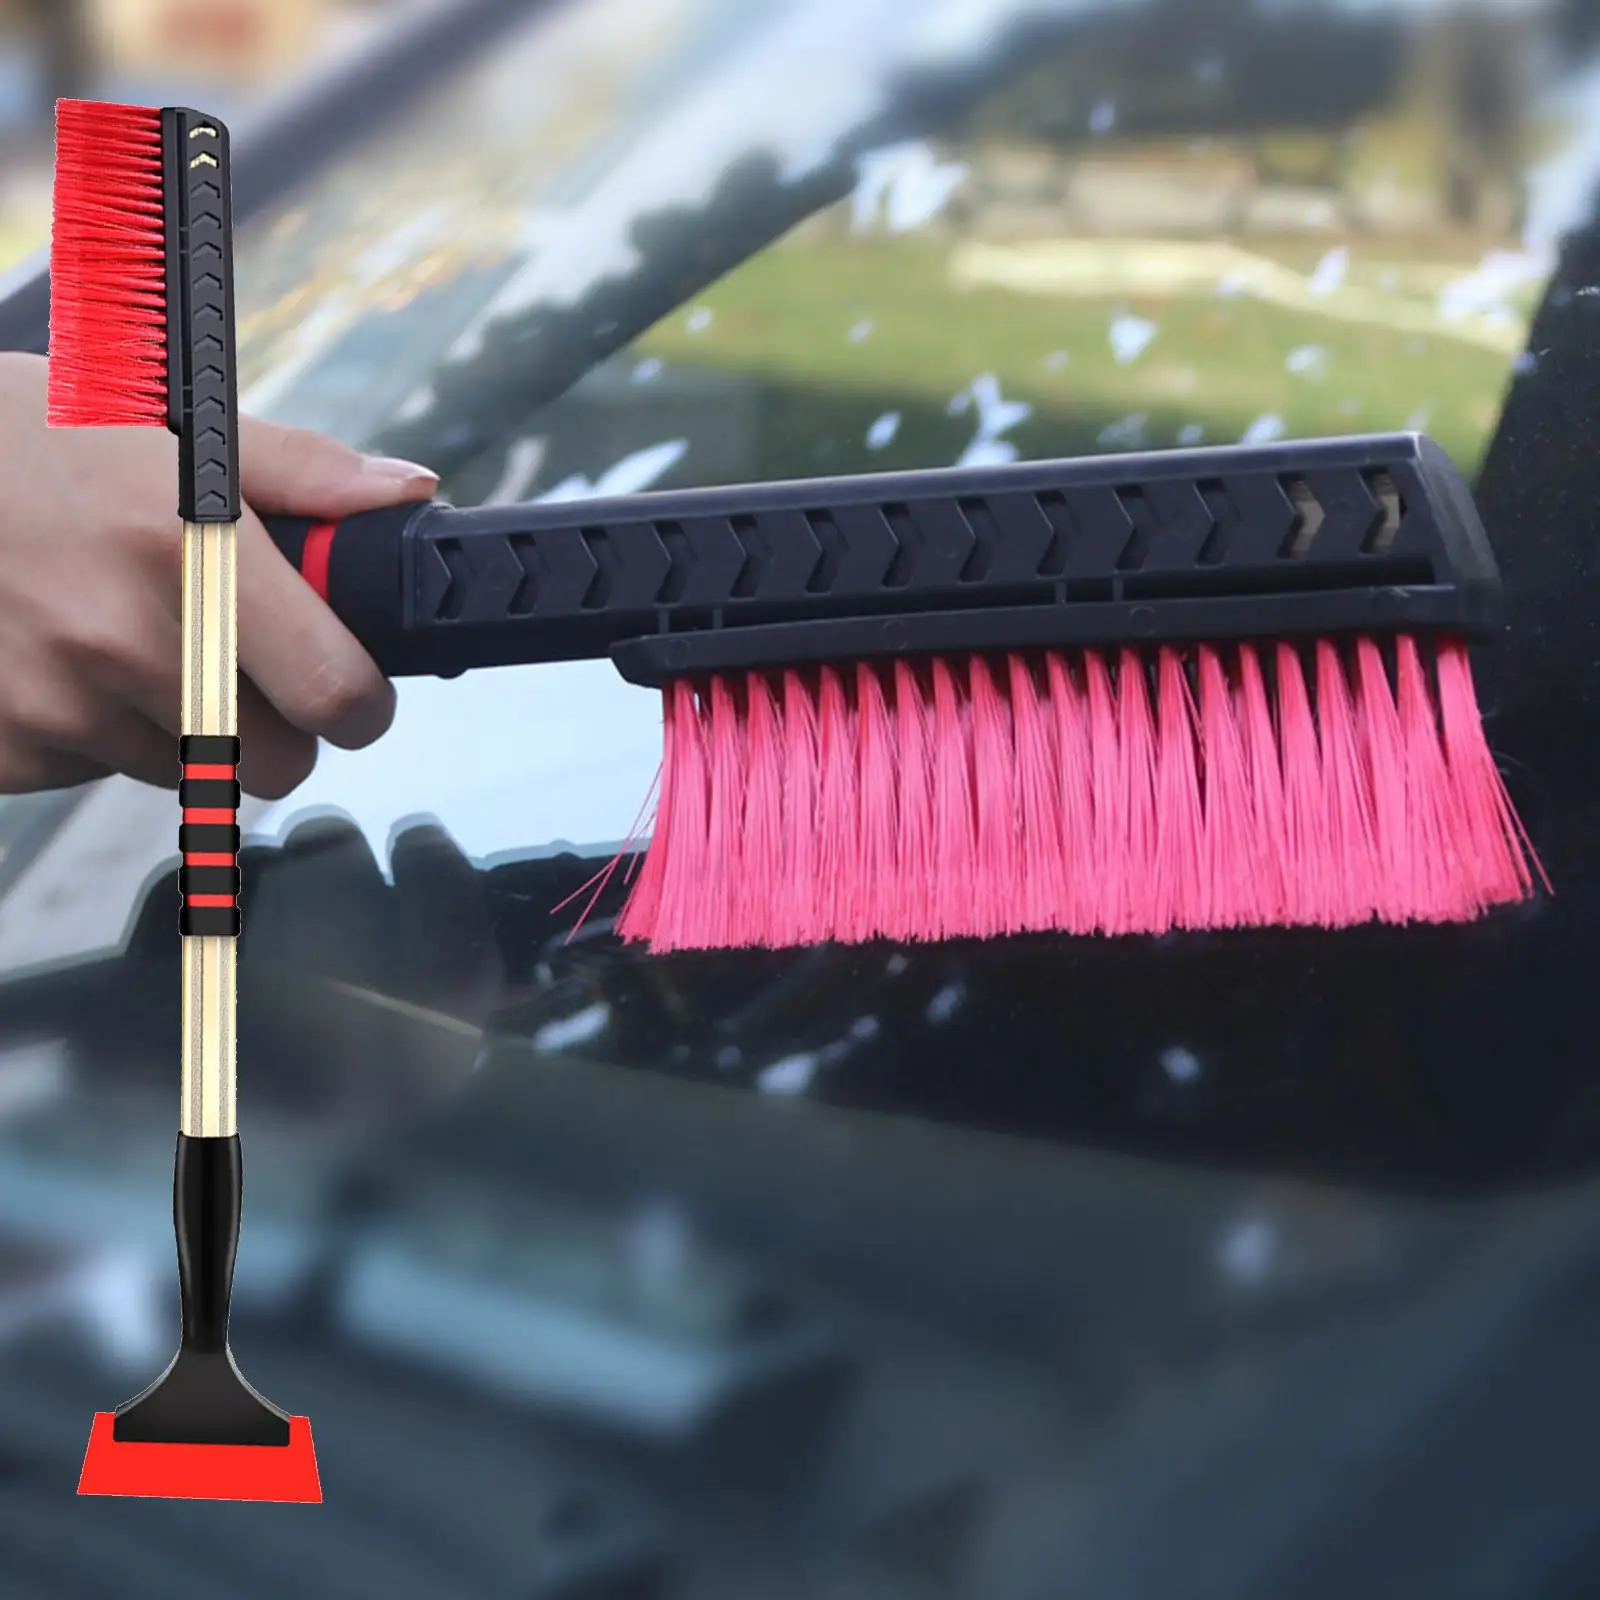 Snow Removal Brush Tool Telescopic Handle Car Window Snow Cleaner for Vehicle